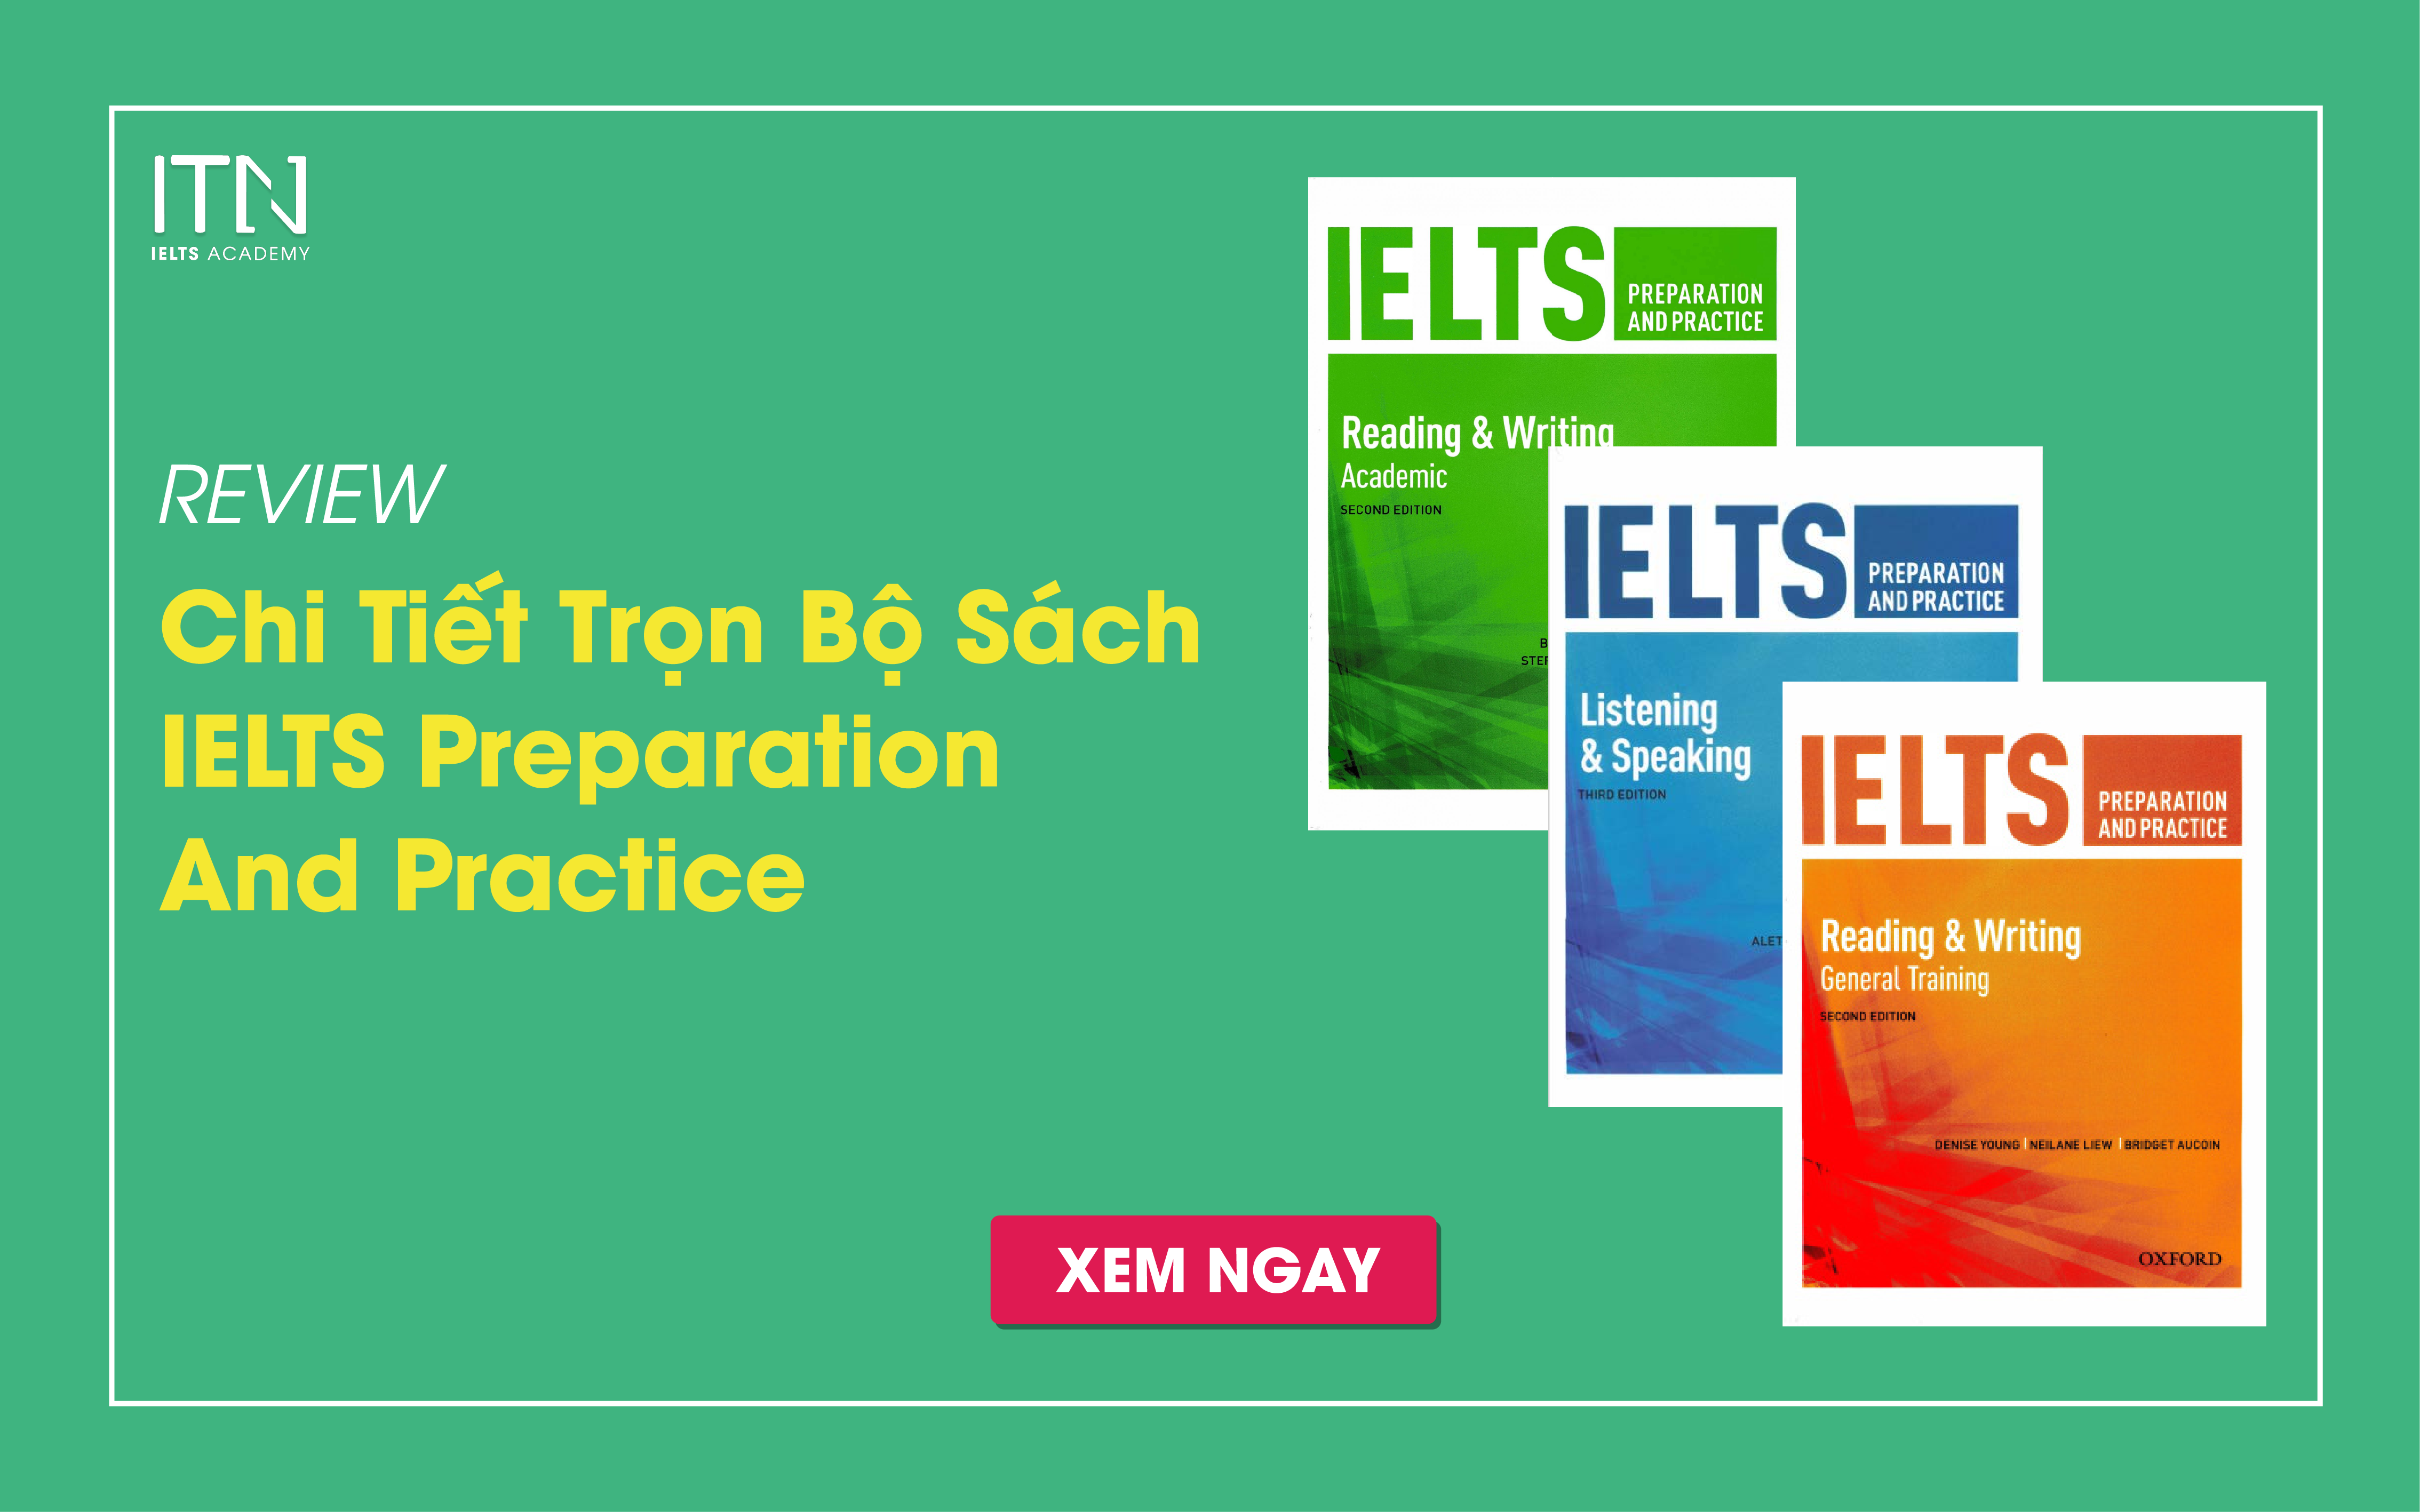 Review Chi Tiết Trọn Bộ Sách IELTS Preparation And Practice